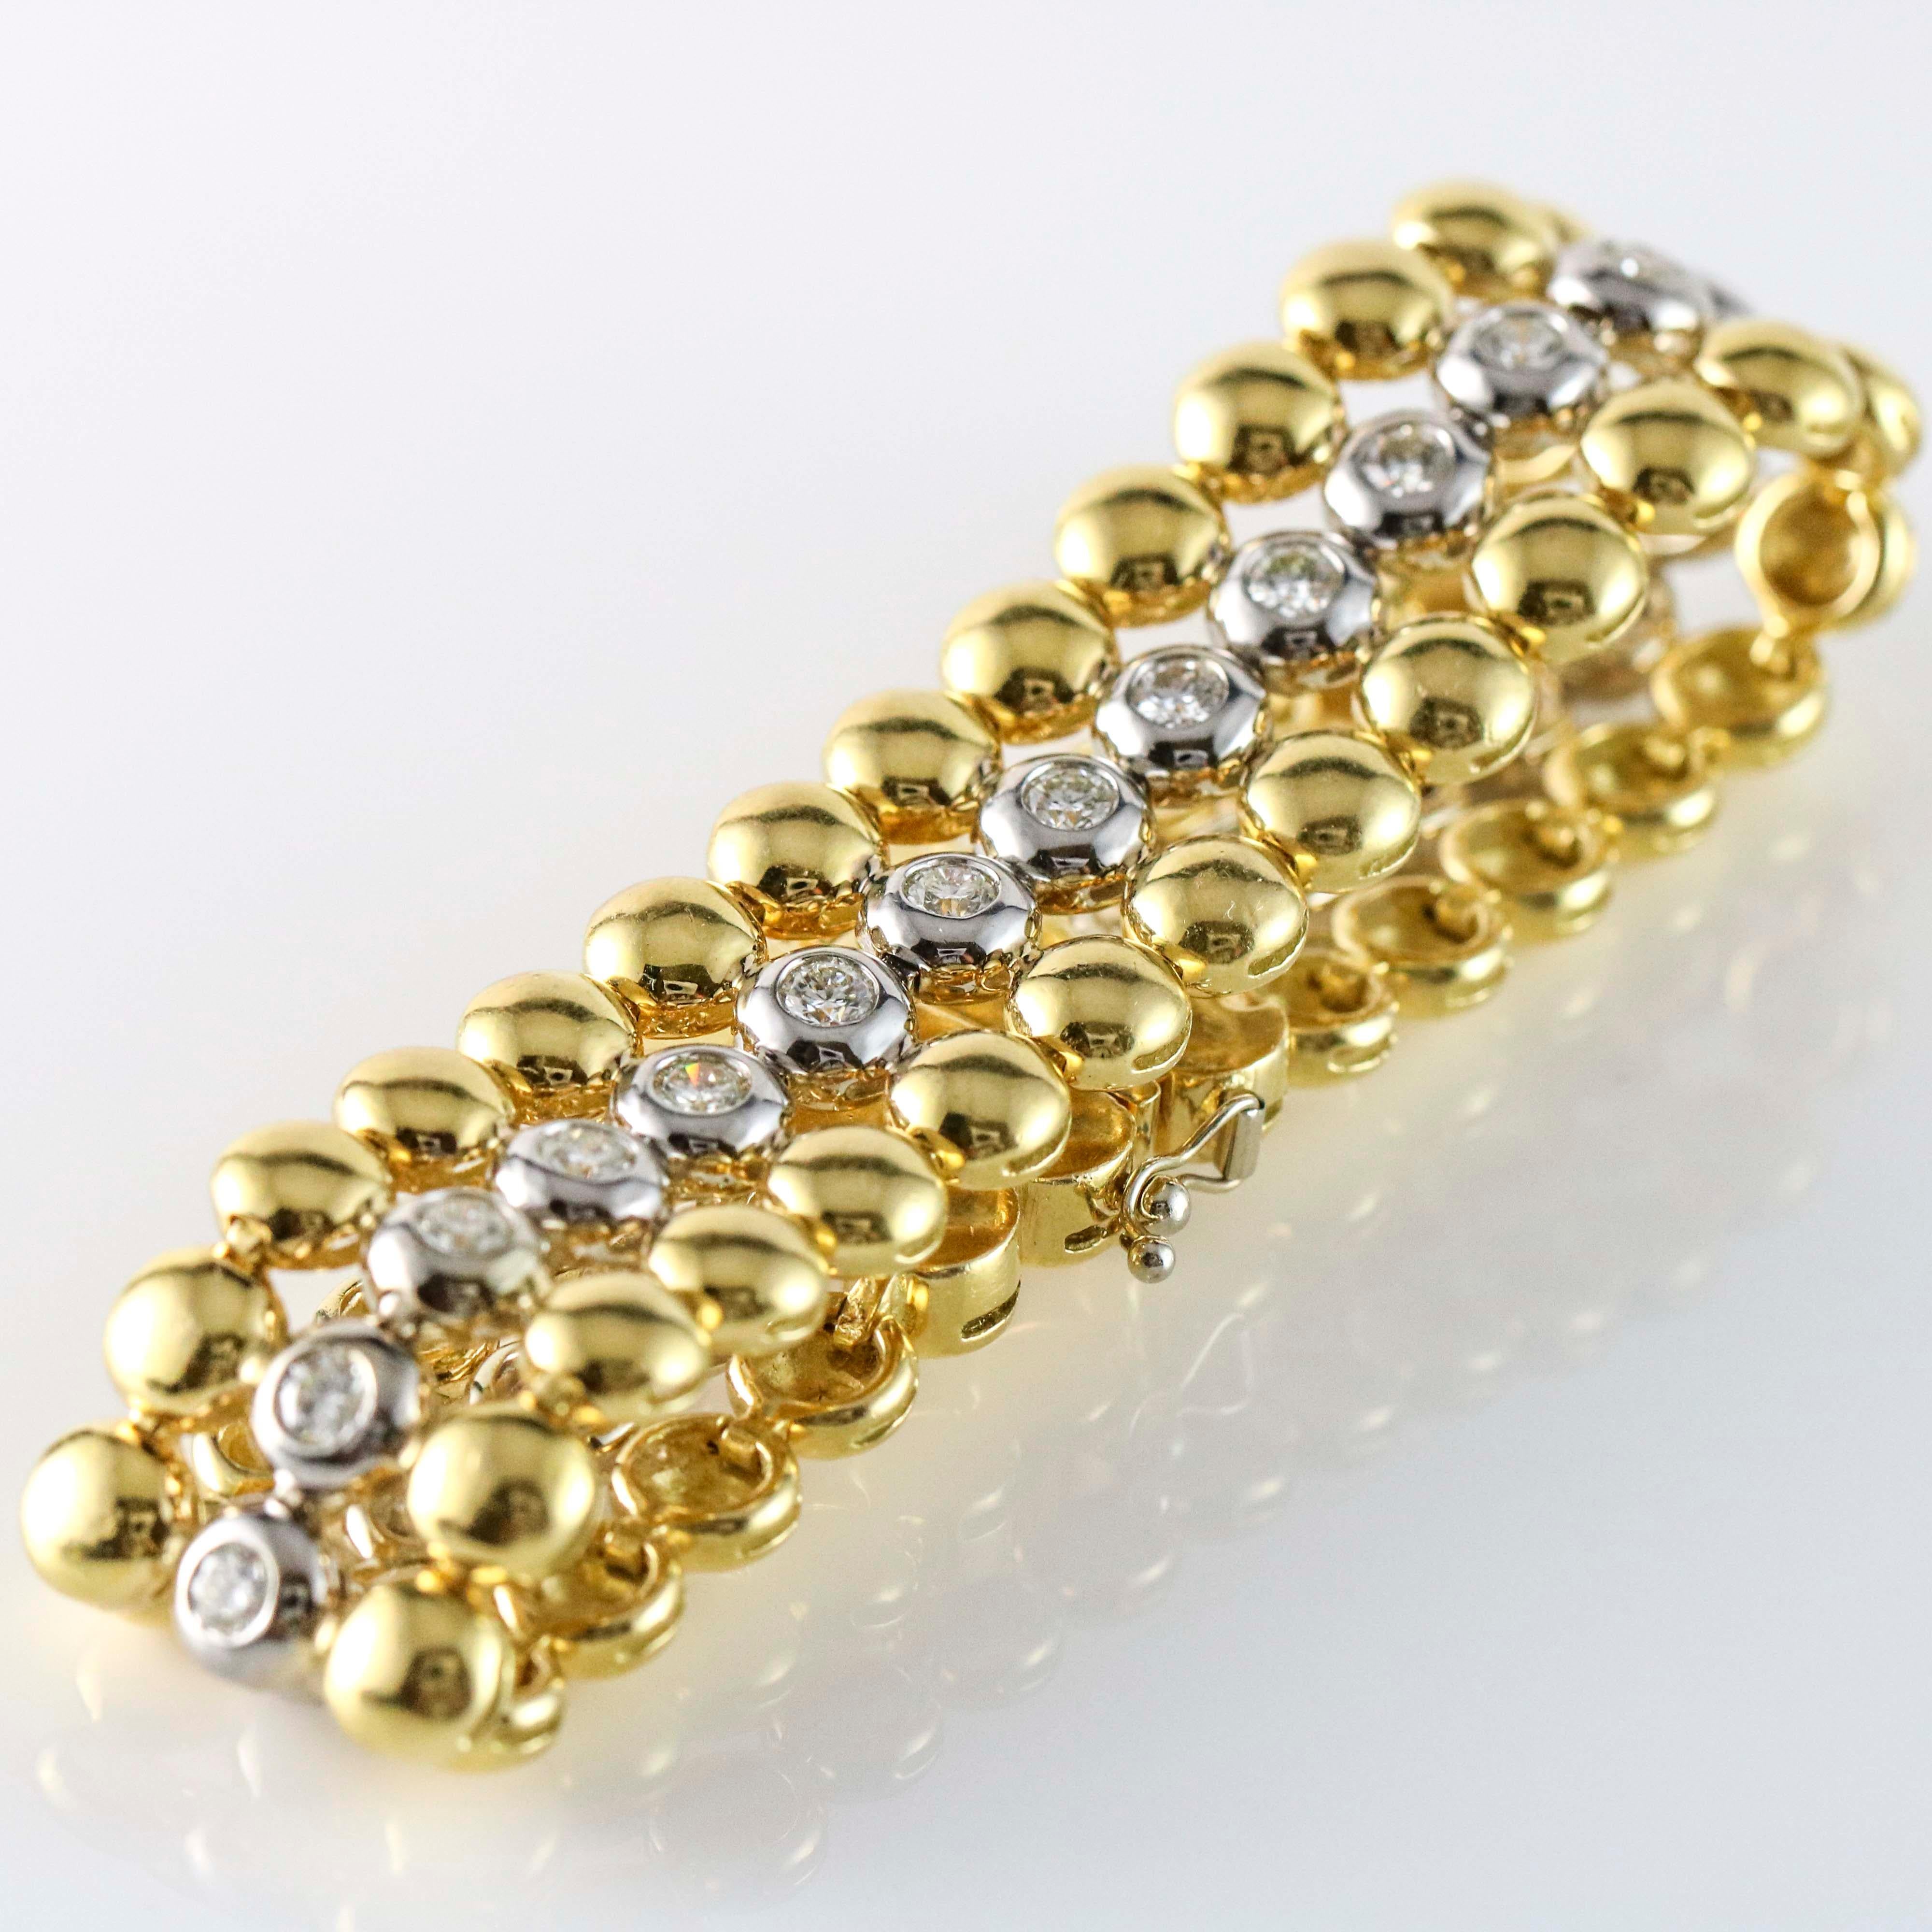 3-row disc link diamond bracelet in 18k white and yellow gold. The bracelet is bezel set with 27 round brilliant cut diamonds. Total carat weight, 5.40 carats. Diamond, color, F-G, clarity, VS-SI. 